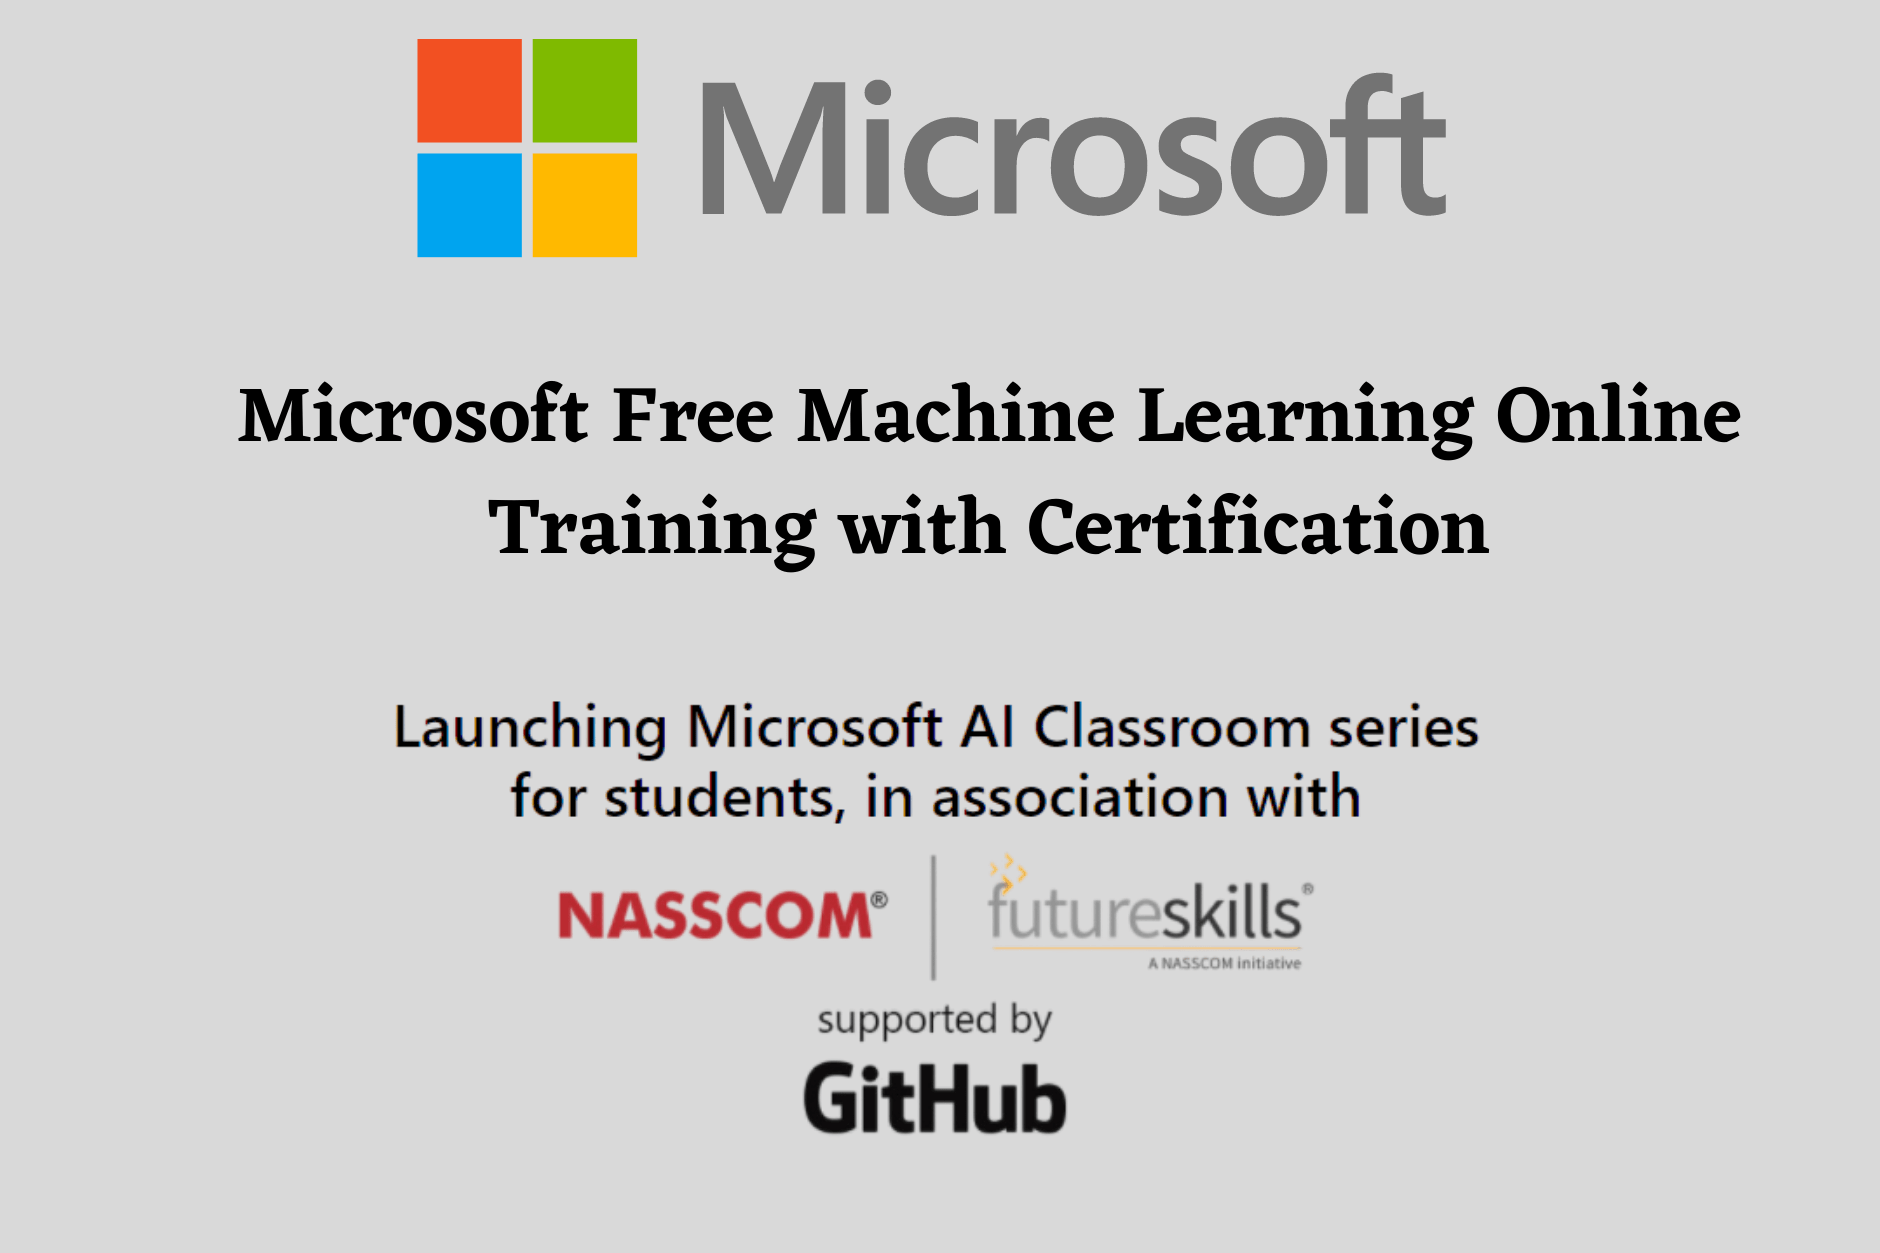 Microsoft Free Machine Learning Online Training with Certification